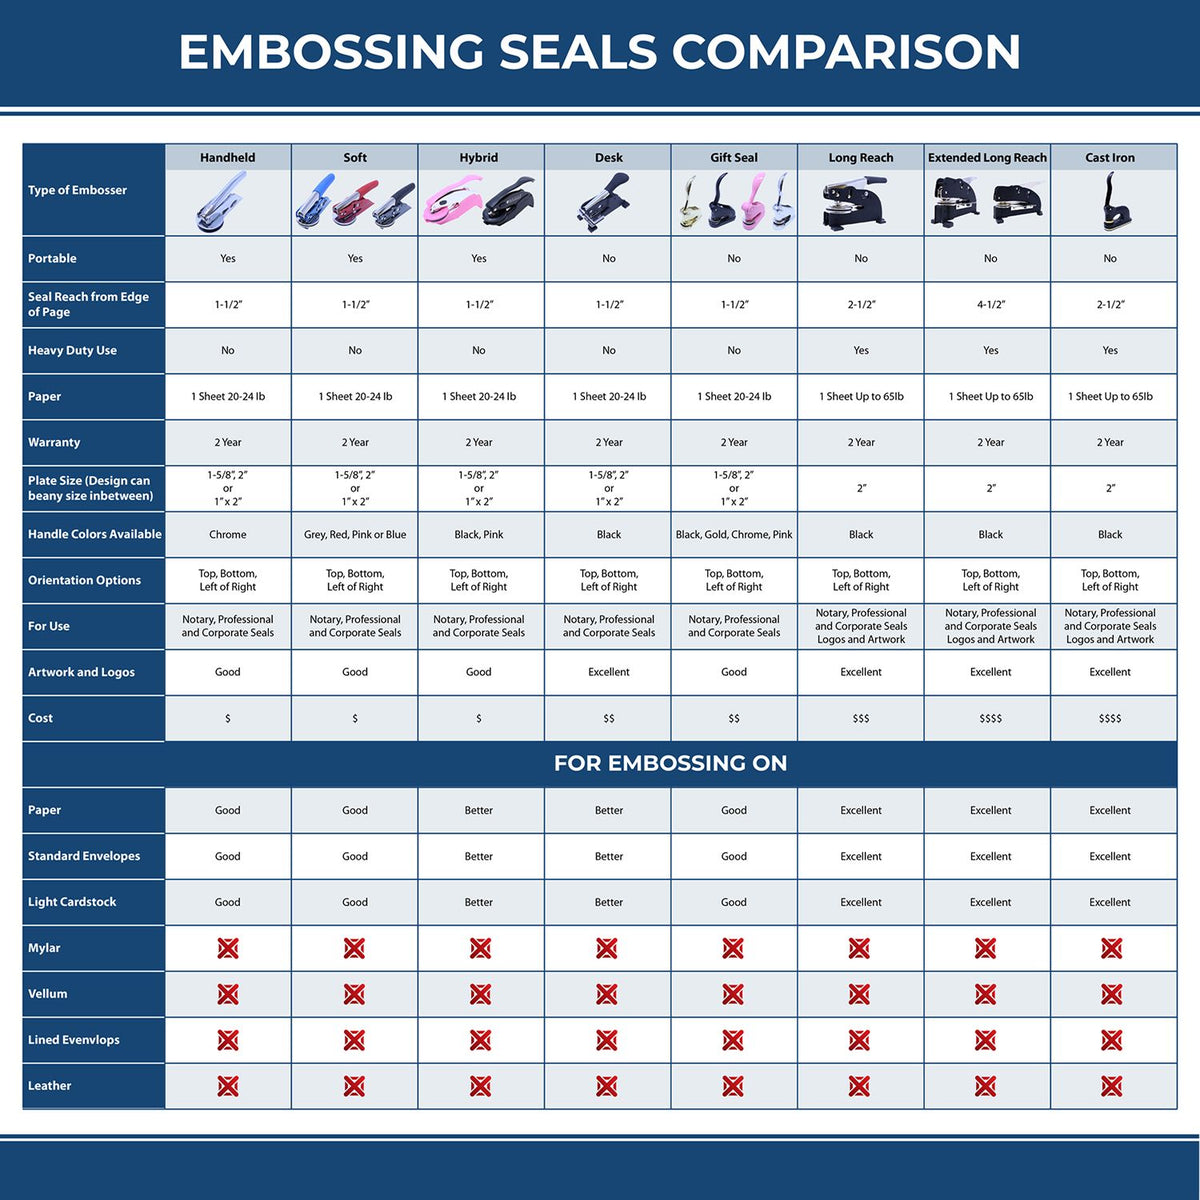 A comparison chart for the different types of mount models available for the Heavy Duty Cast Iron Nevada Geologist Seal Embosser